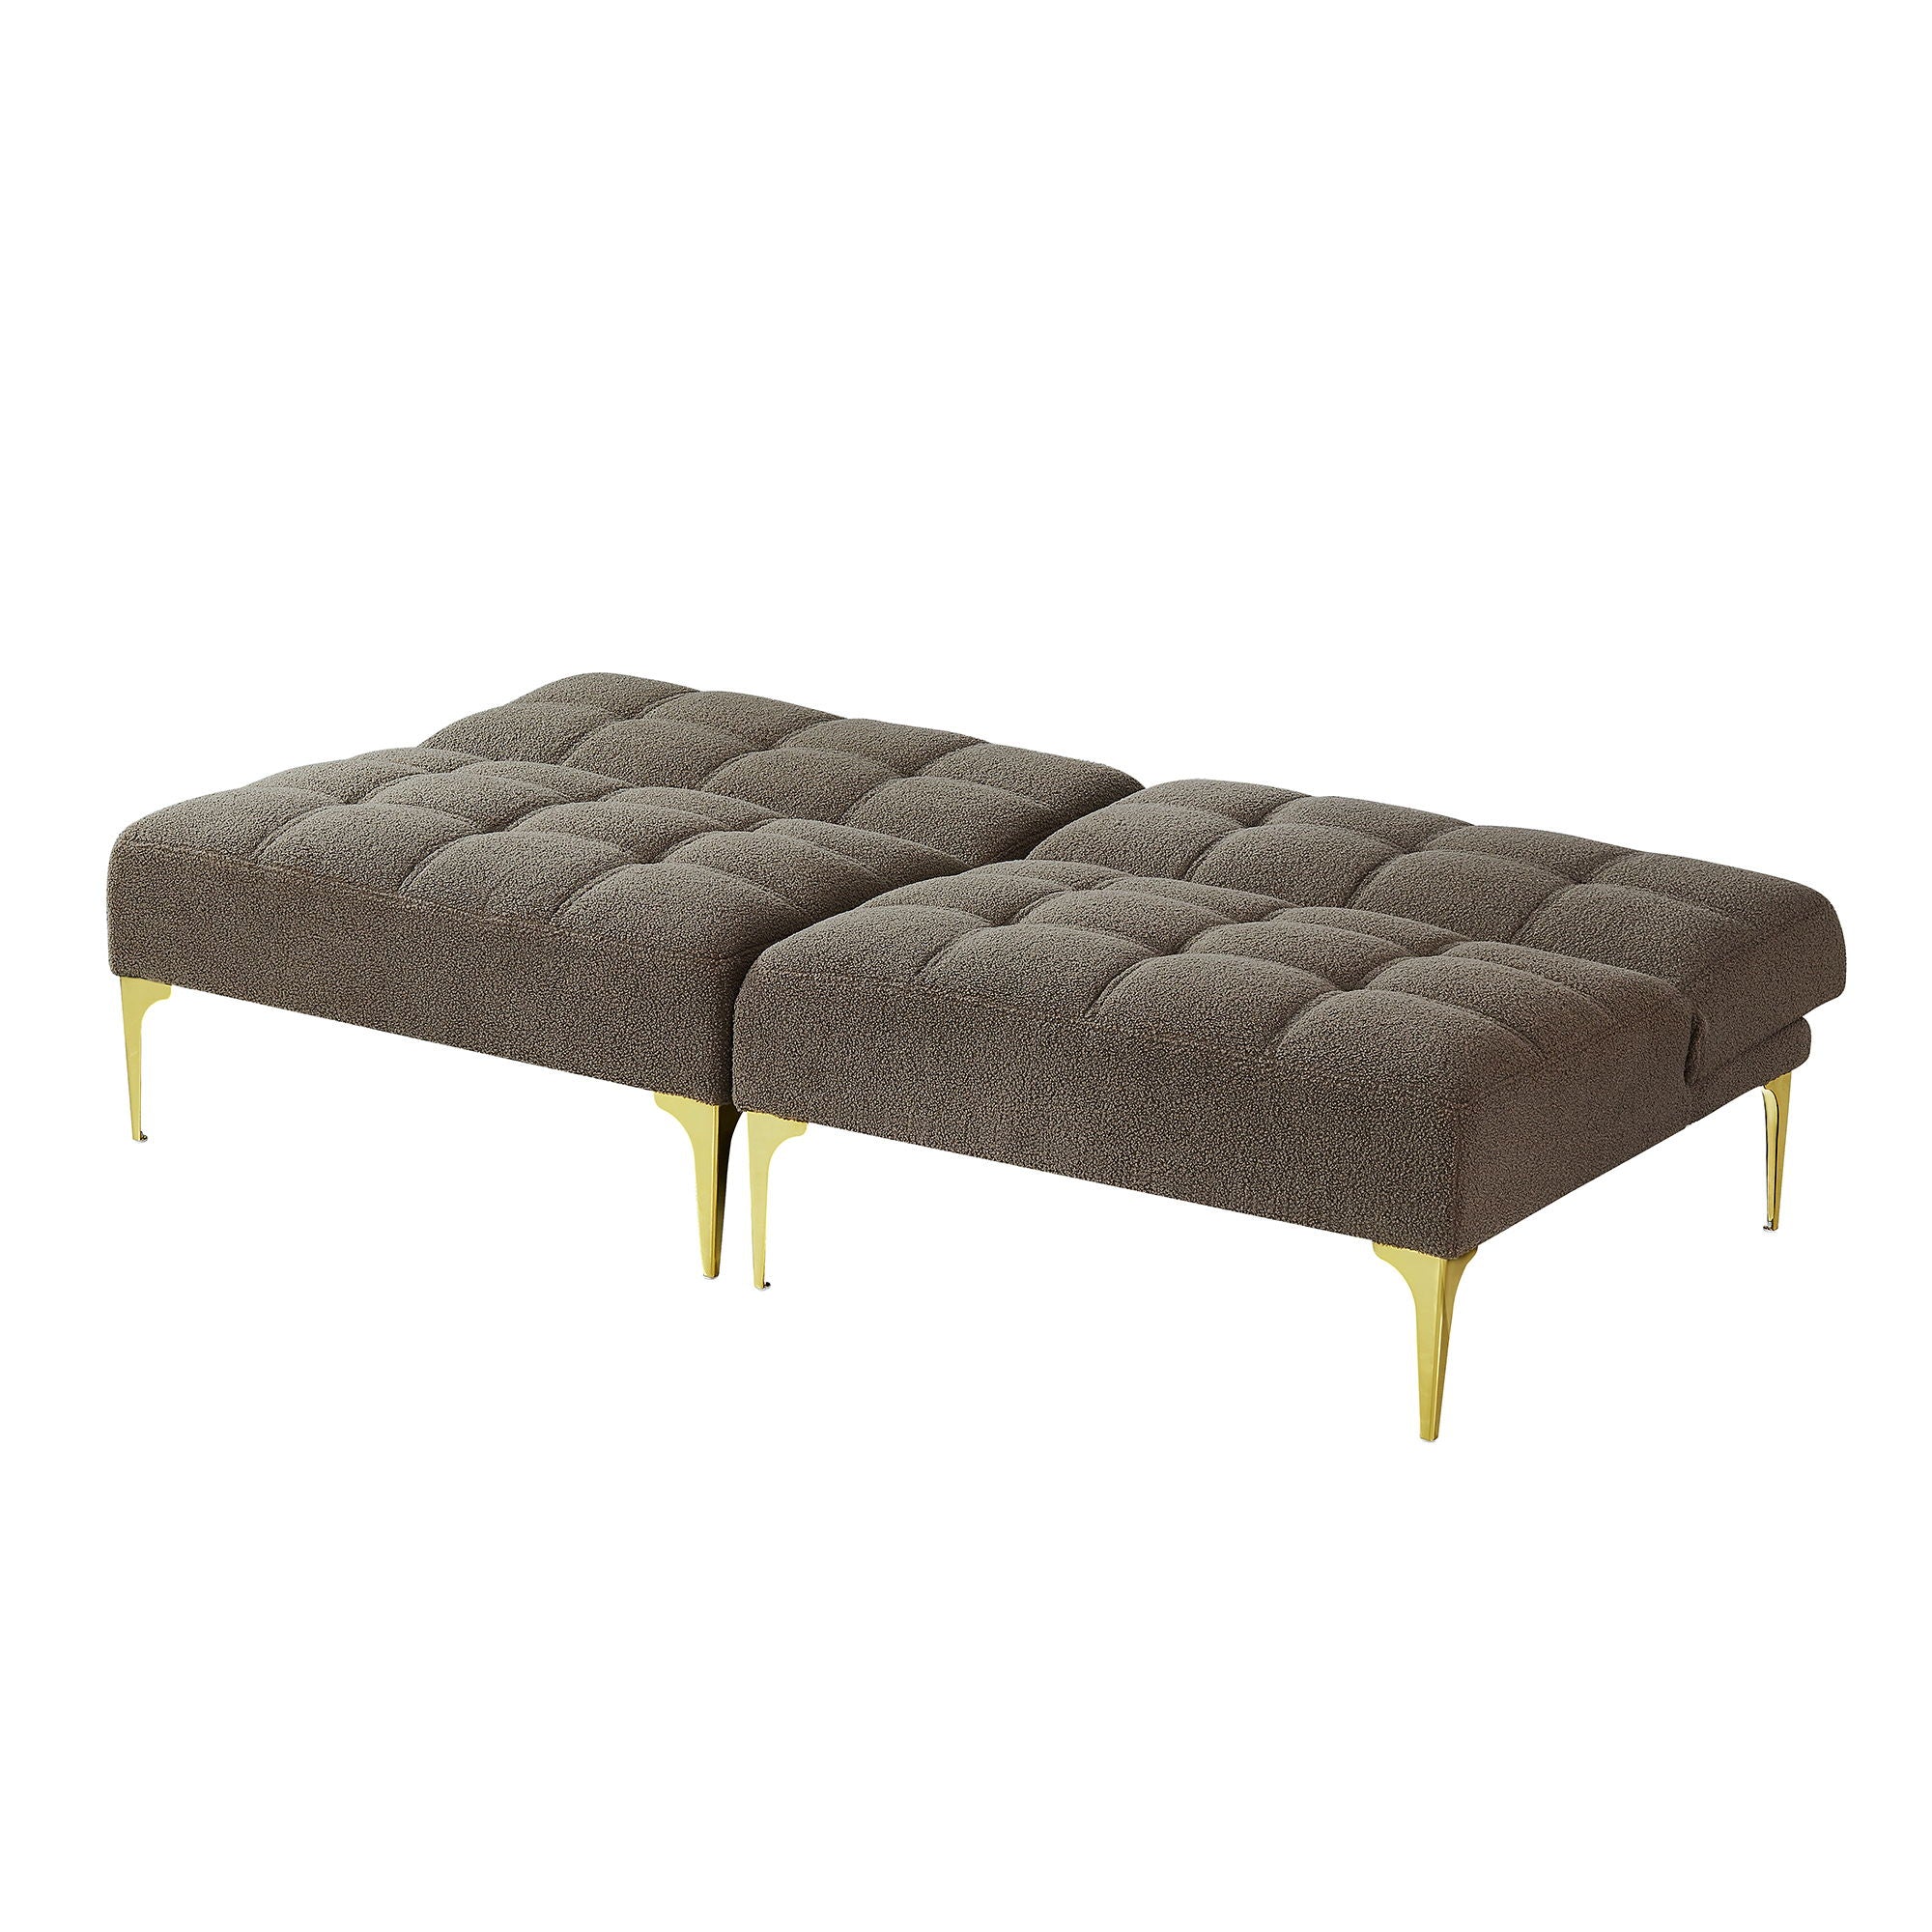 Convertible Sofa Bed Futon With Gold Metal Legs Teddy Fabric Taupe